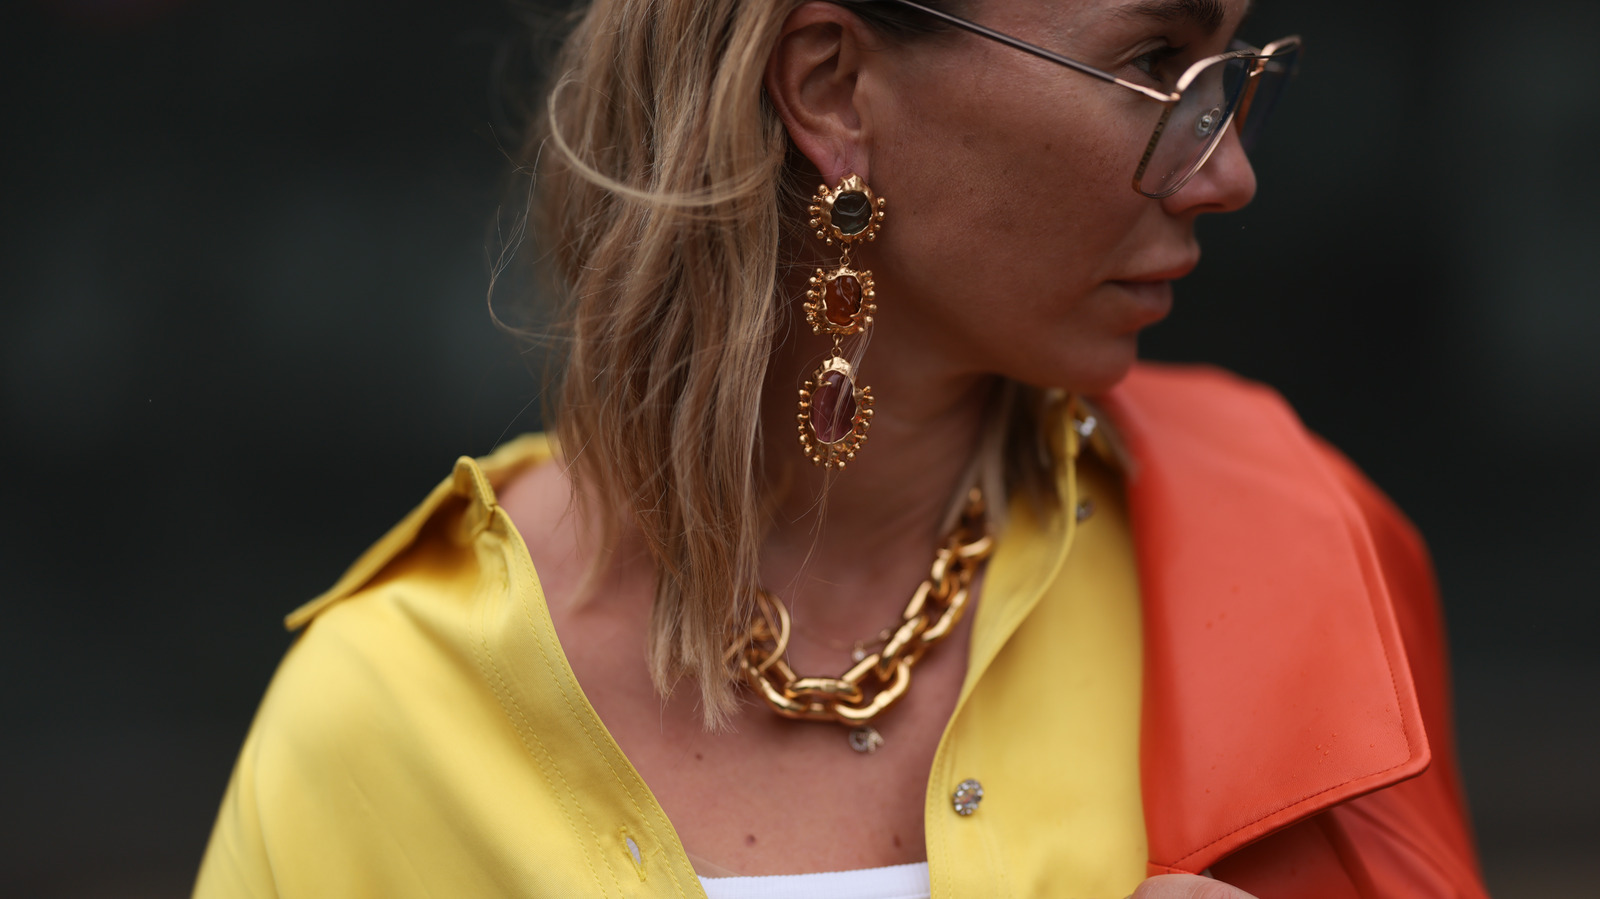 10 Jewelry Trends That Will Be Popular in 2023 - Erica O'Brien